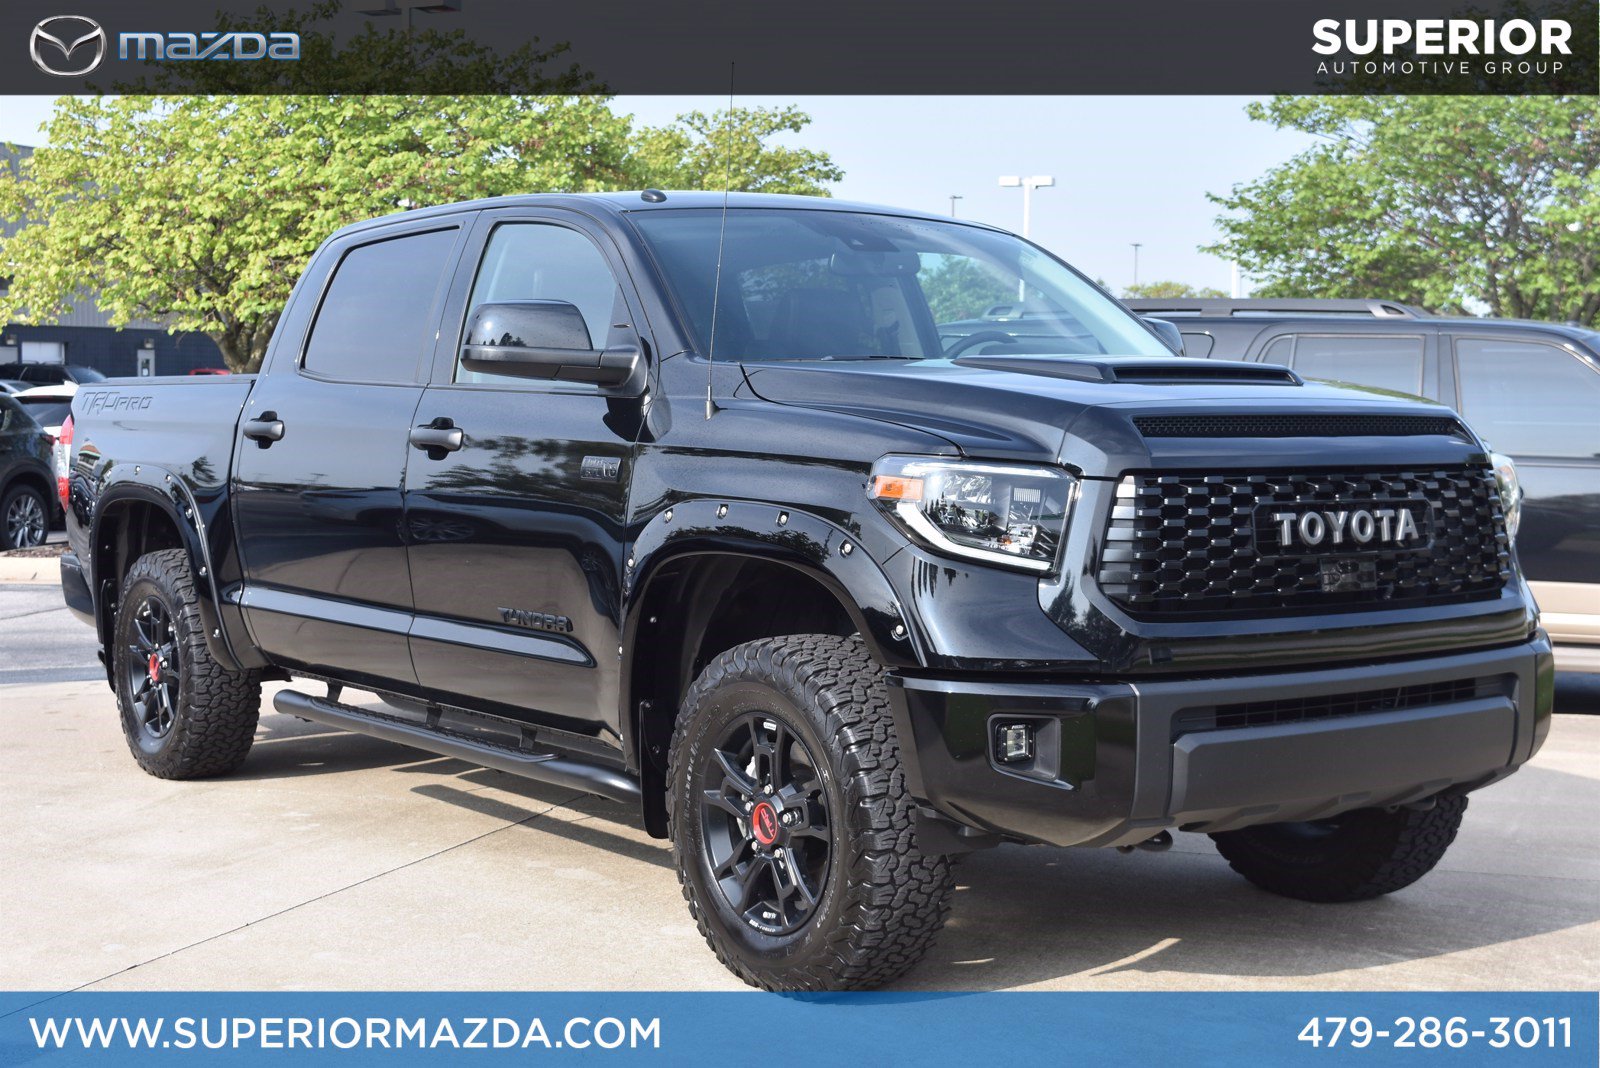 Pre-Owned 2019 Toyota Tundra 4WD TRD Pro Crew Cab Pickup in